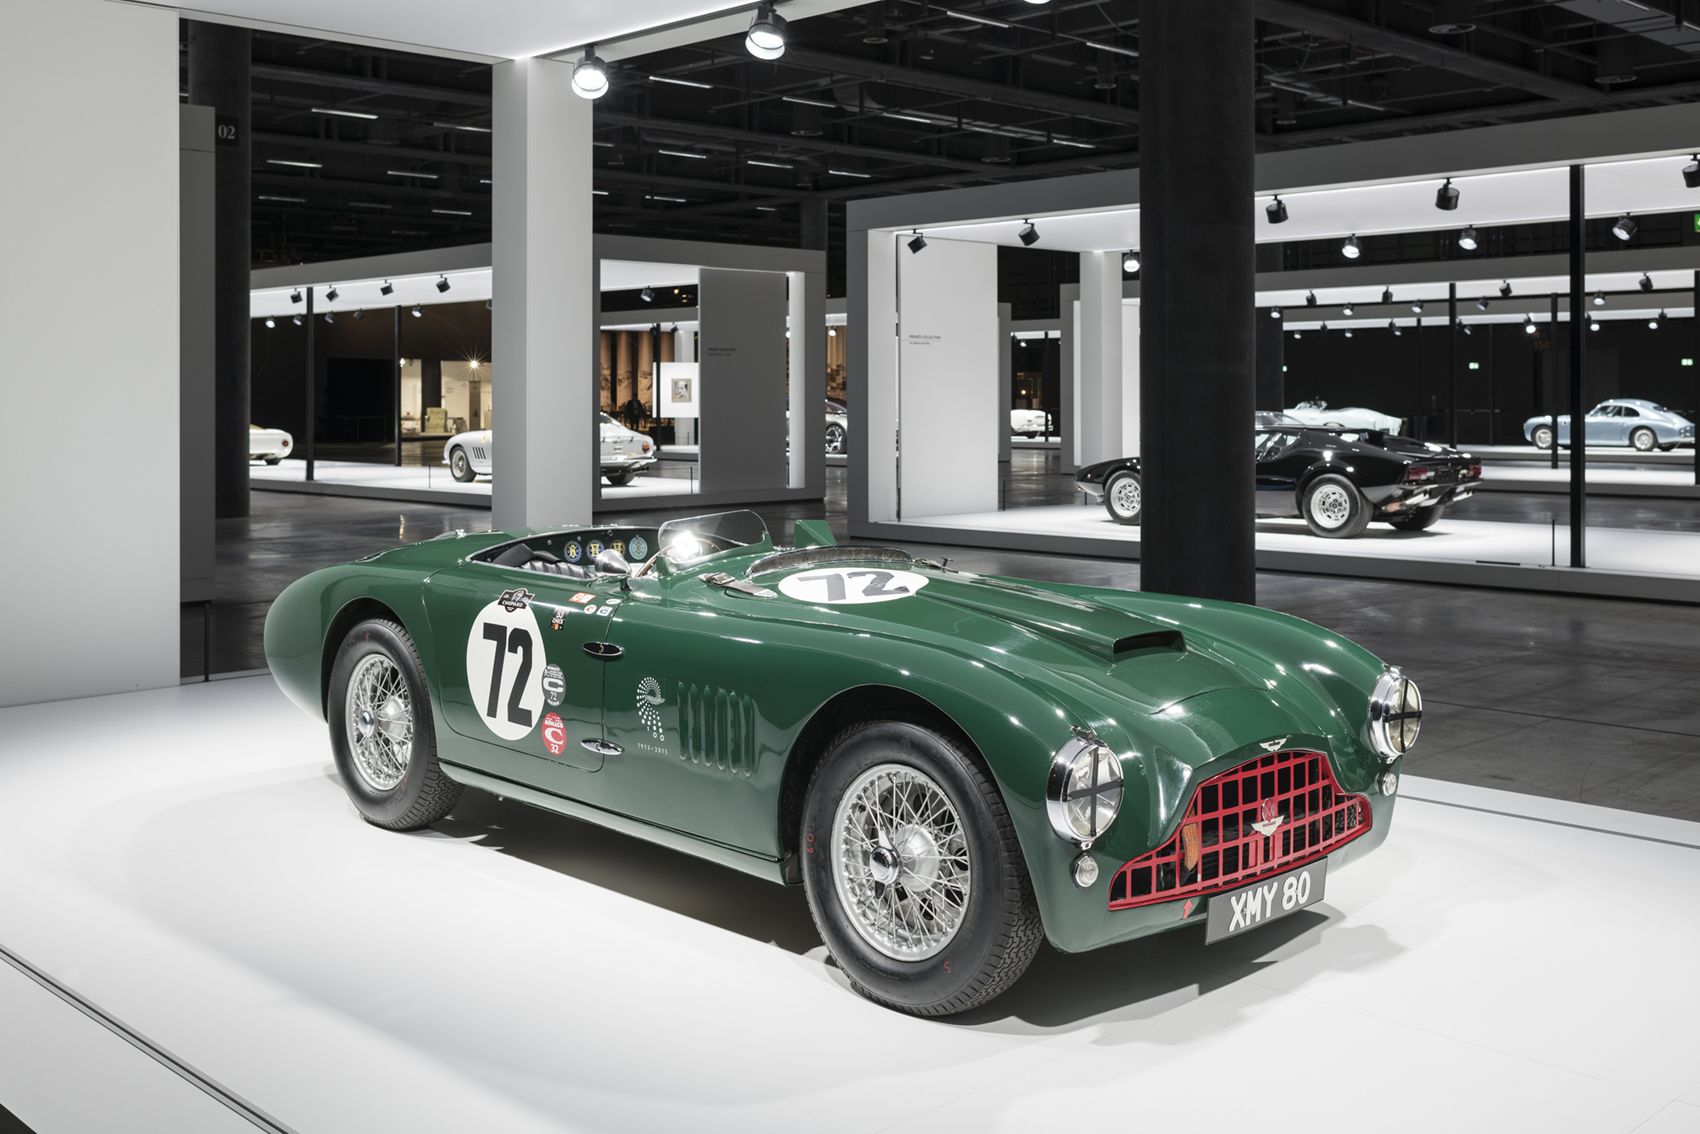 More automotive art from Grand Basel